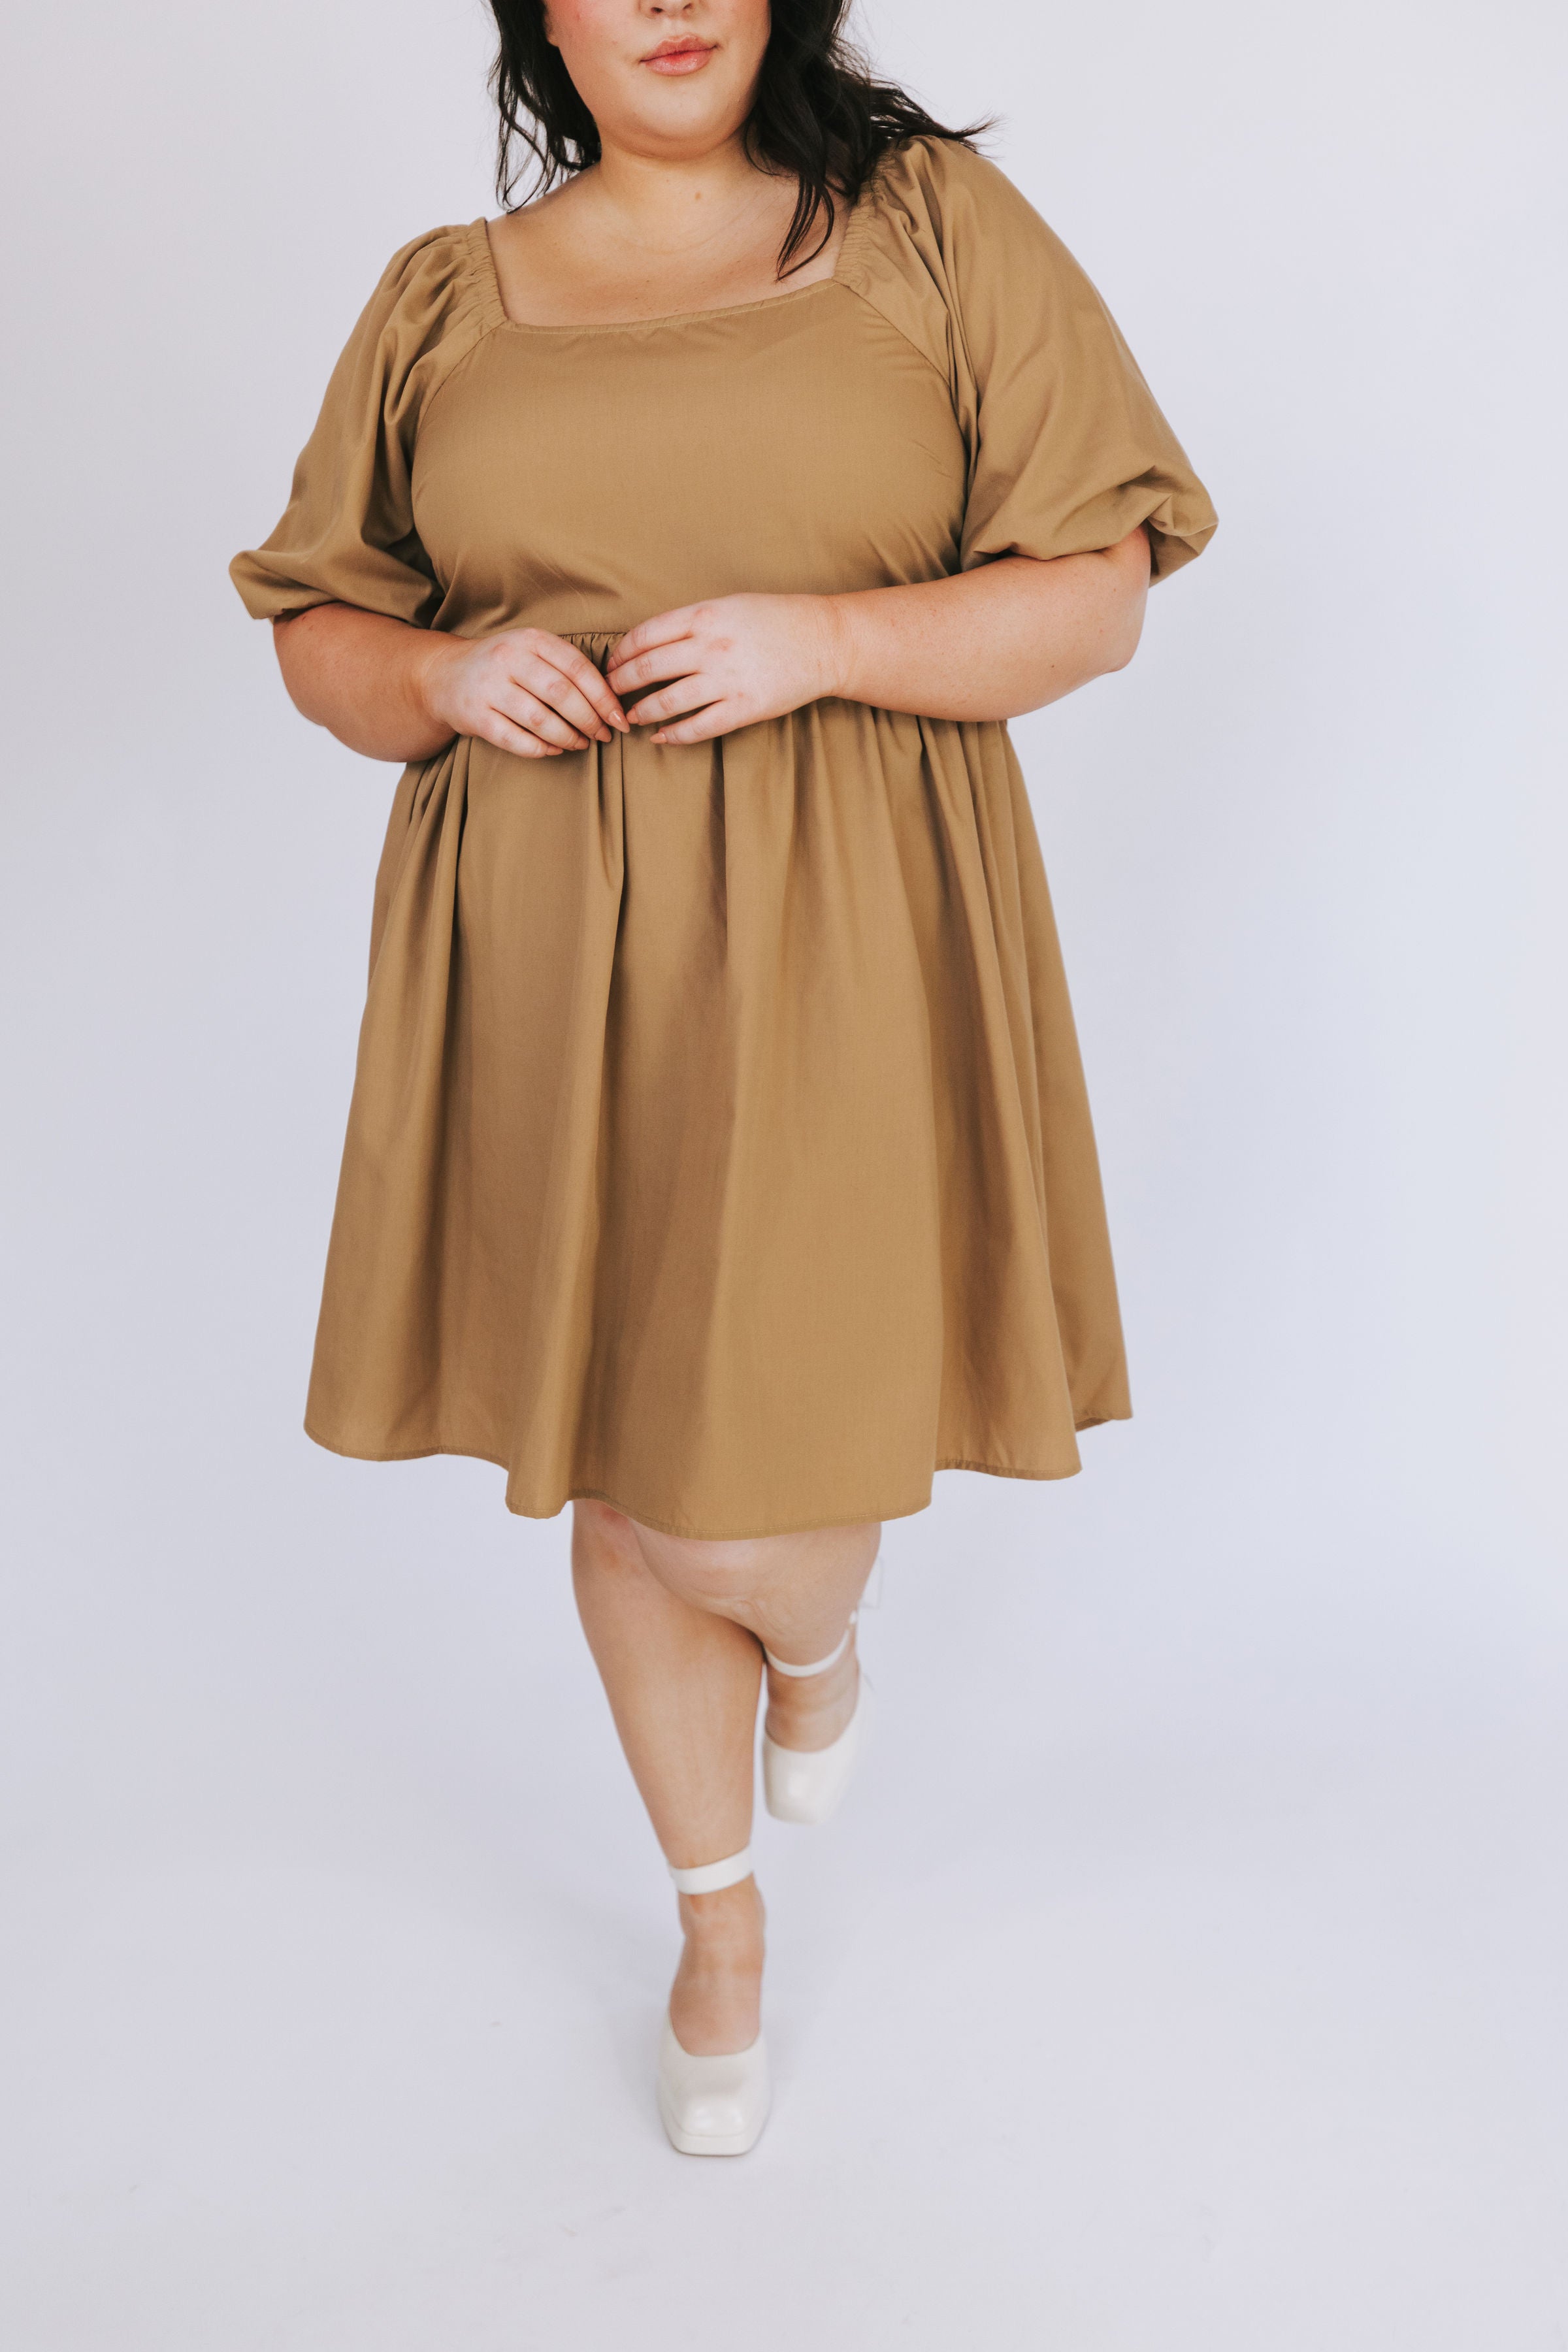 PLUS SIZE - Say It First Dress